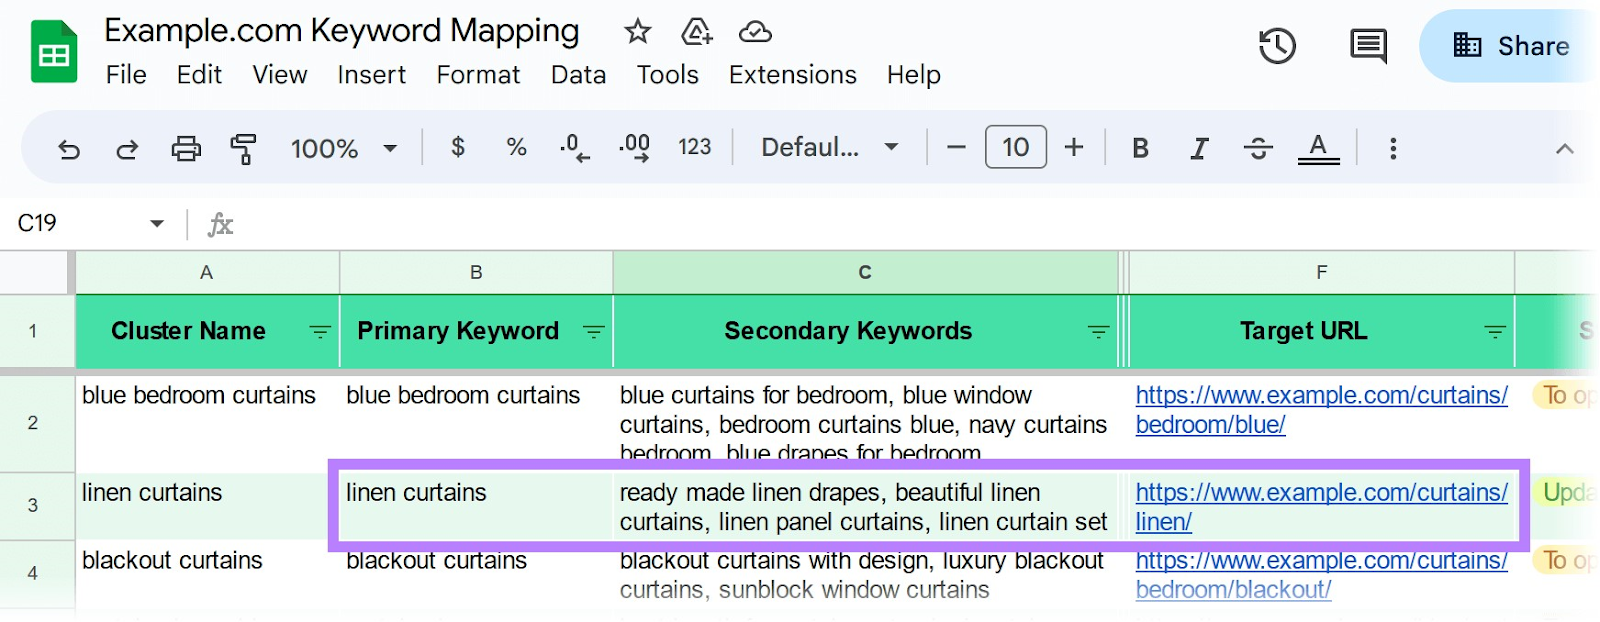 example of “linen curtains” in keyword map